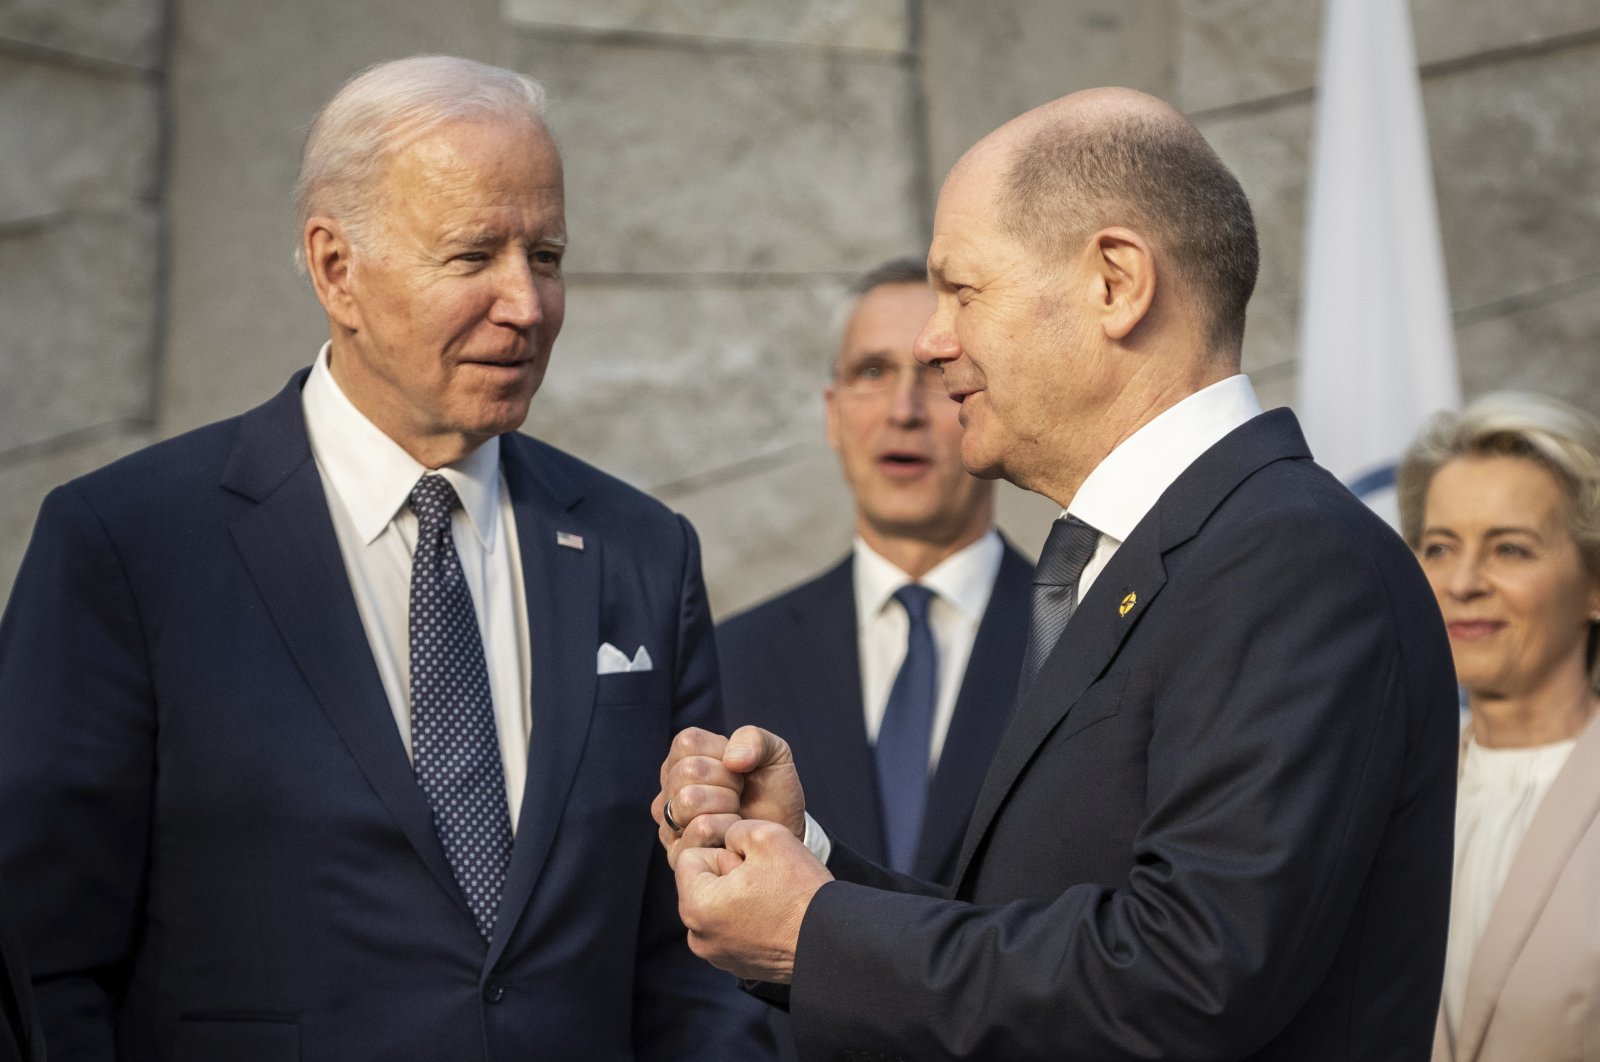 U.S. President Joe Biden (L) and German Chancellor Olaf Scholz (R) talk during an extraordinary NATO summit at NATO headquarters in Brussels, Belgium, Thursday, March 24, 2022. (DPA via AP, Pool)